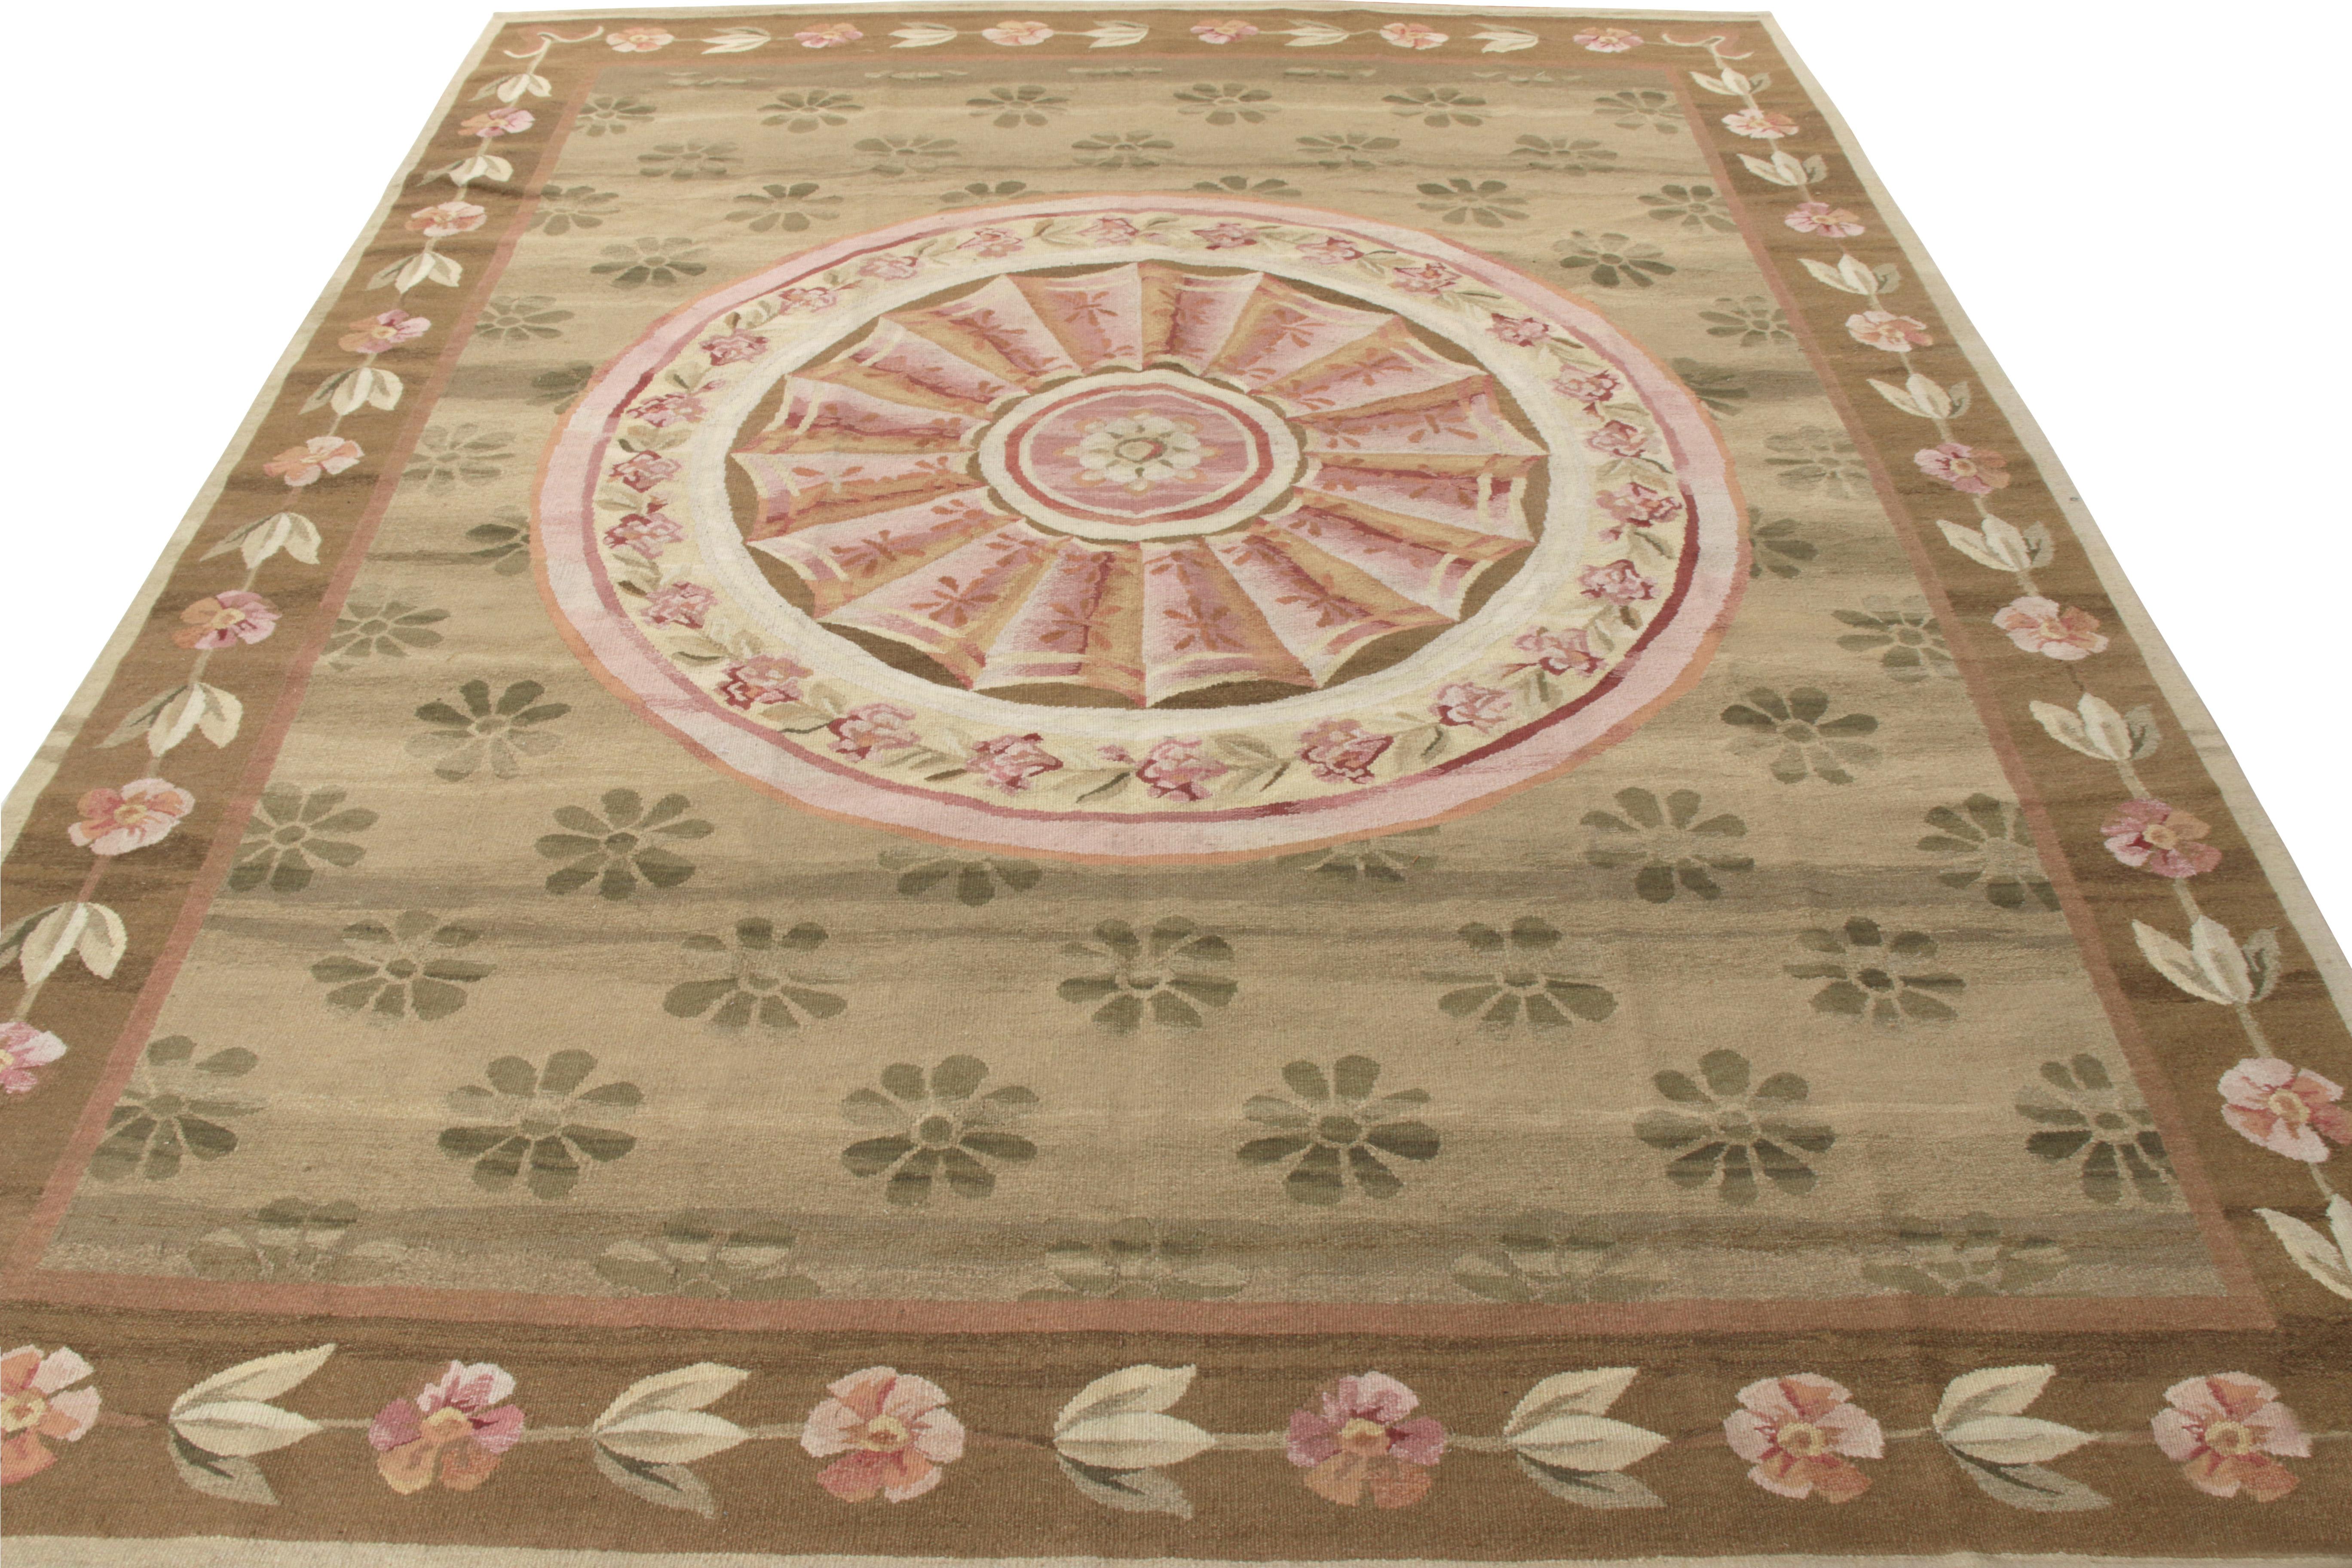 An 8x10 ode to celebrated 18th-century Aubusson flat weave styles, joining Rug & Kilim’s coveted European Collection. Handwoven in wool with a scale exemplifying neoclassical elegance, the rug showcases a central floral pattern in cream and pink